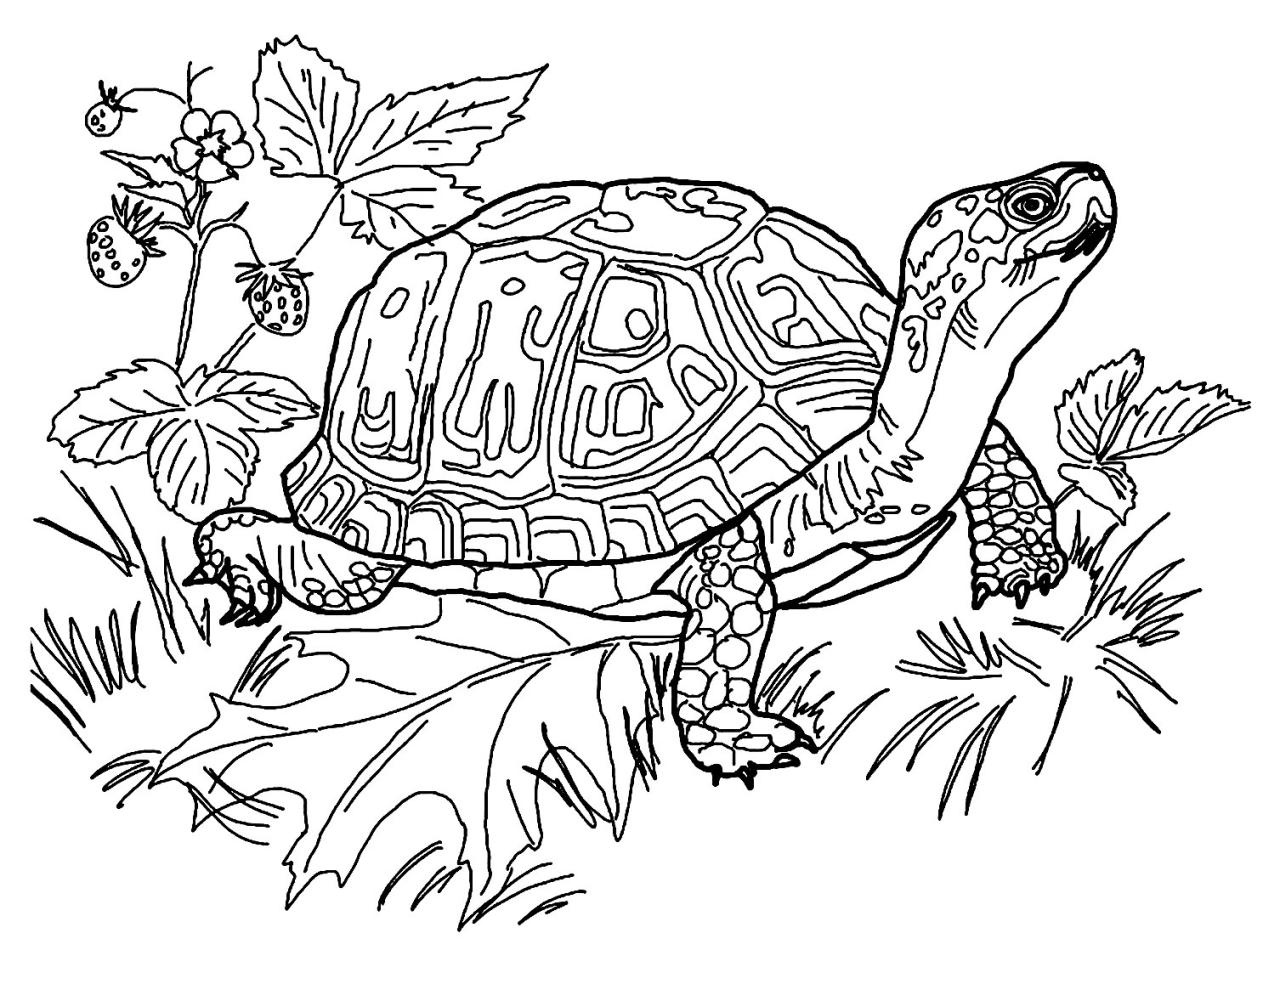 Turtles to download Turtles Kids Coloring Pages